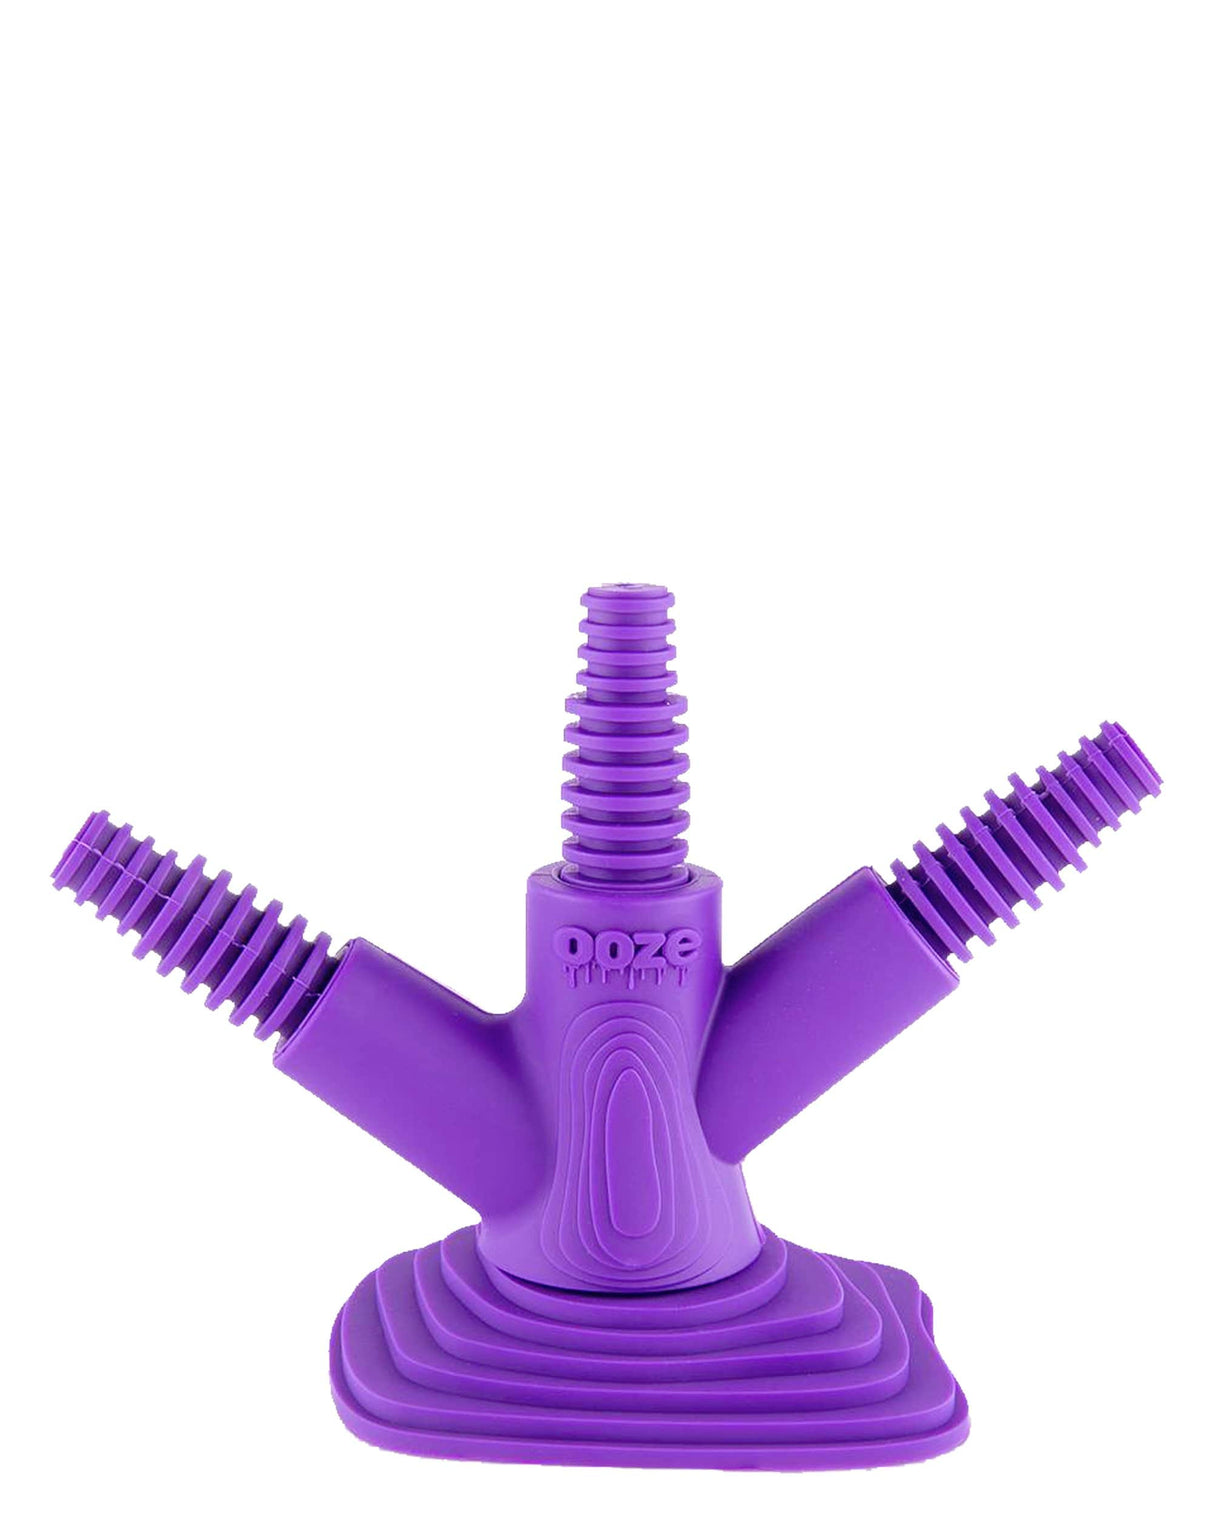 Valiant Purple Silicone Dab Rig with Banger